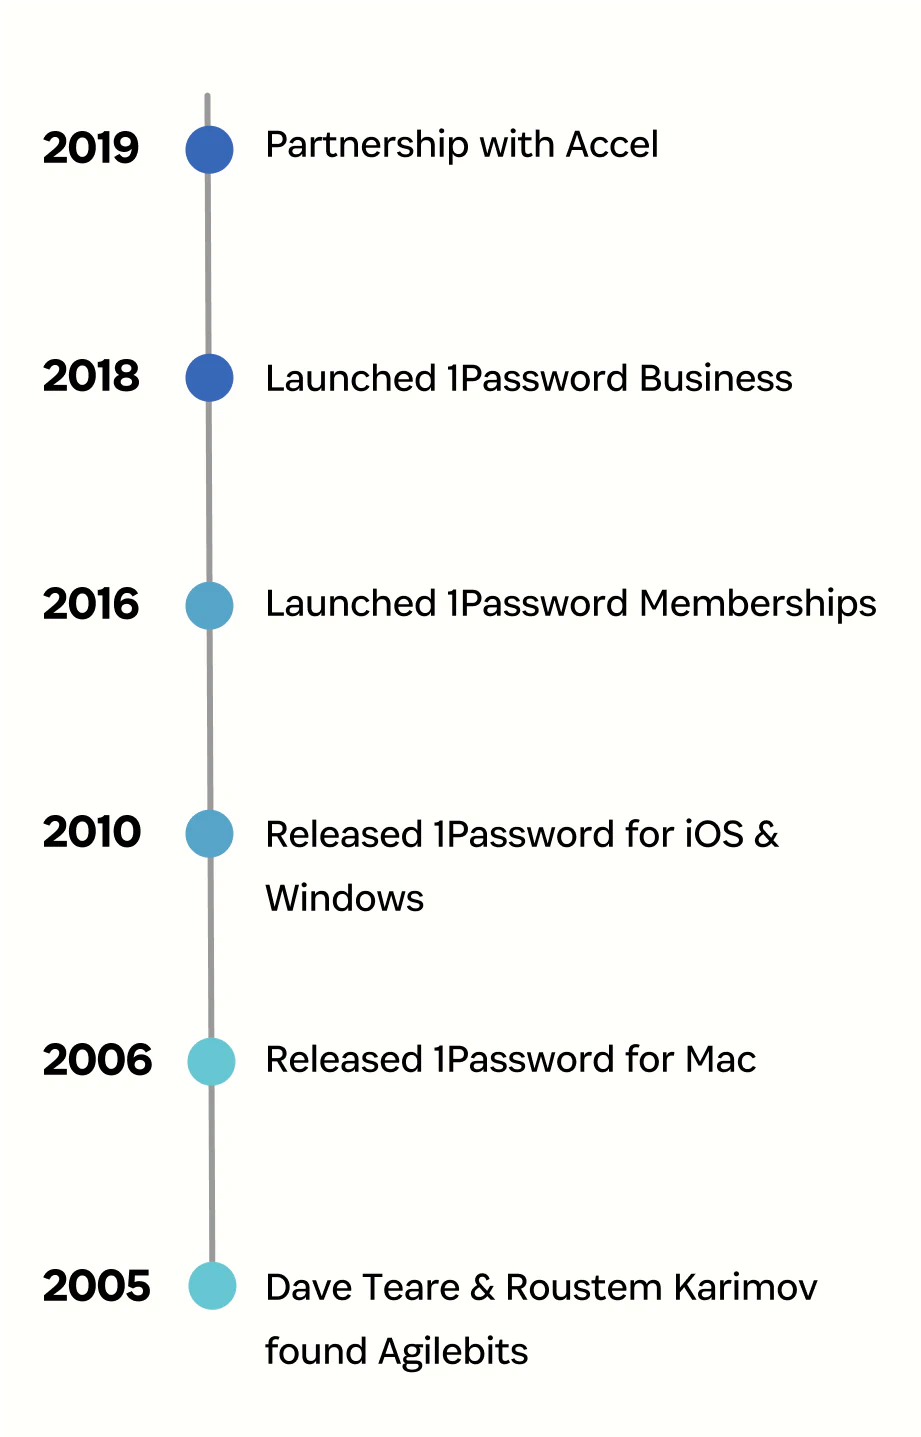 1Password company timeline and history.